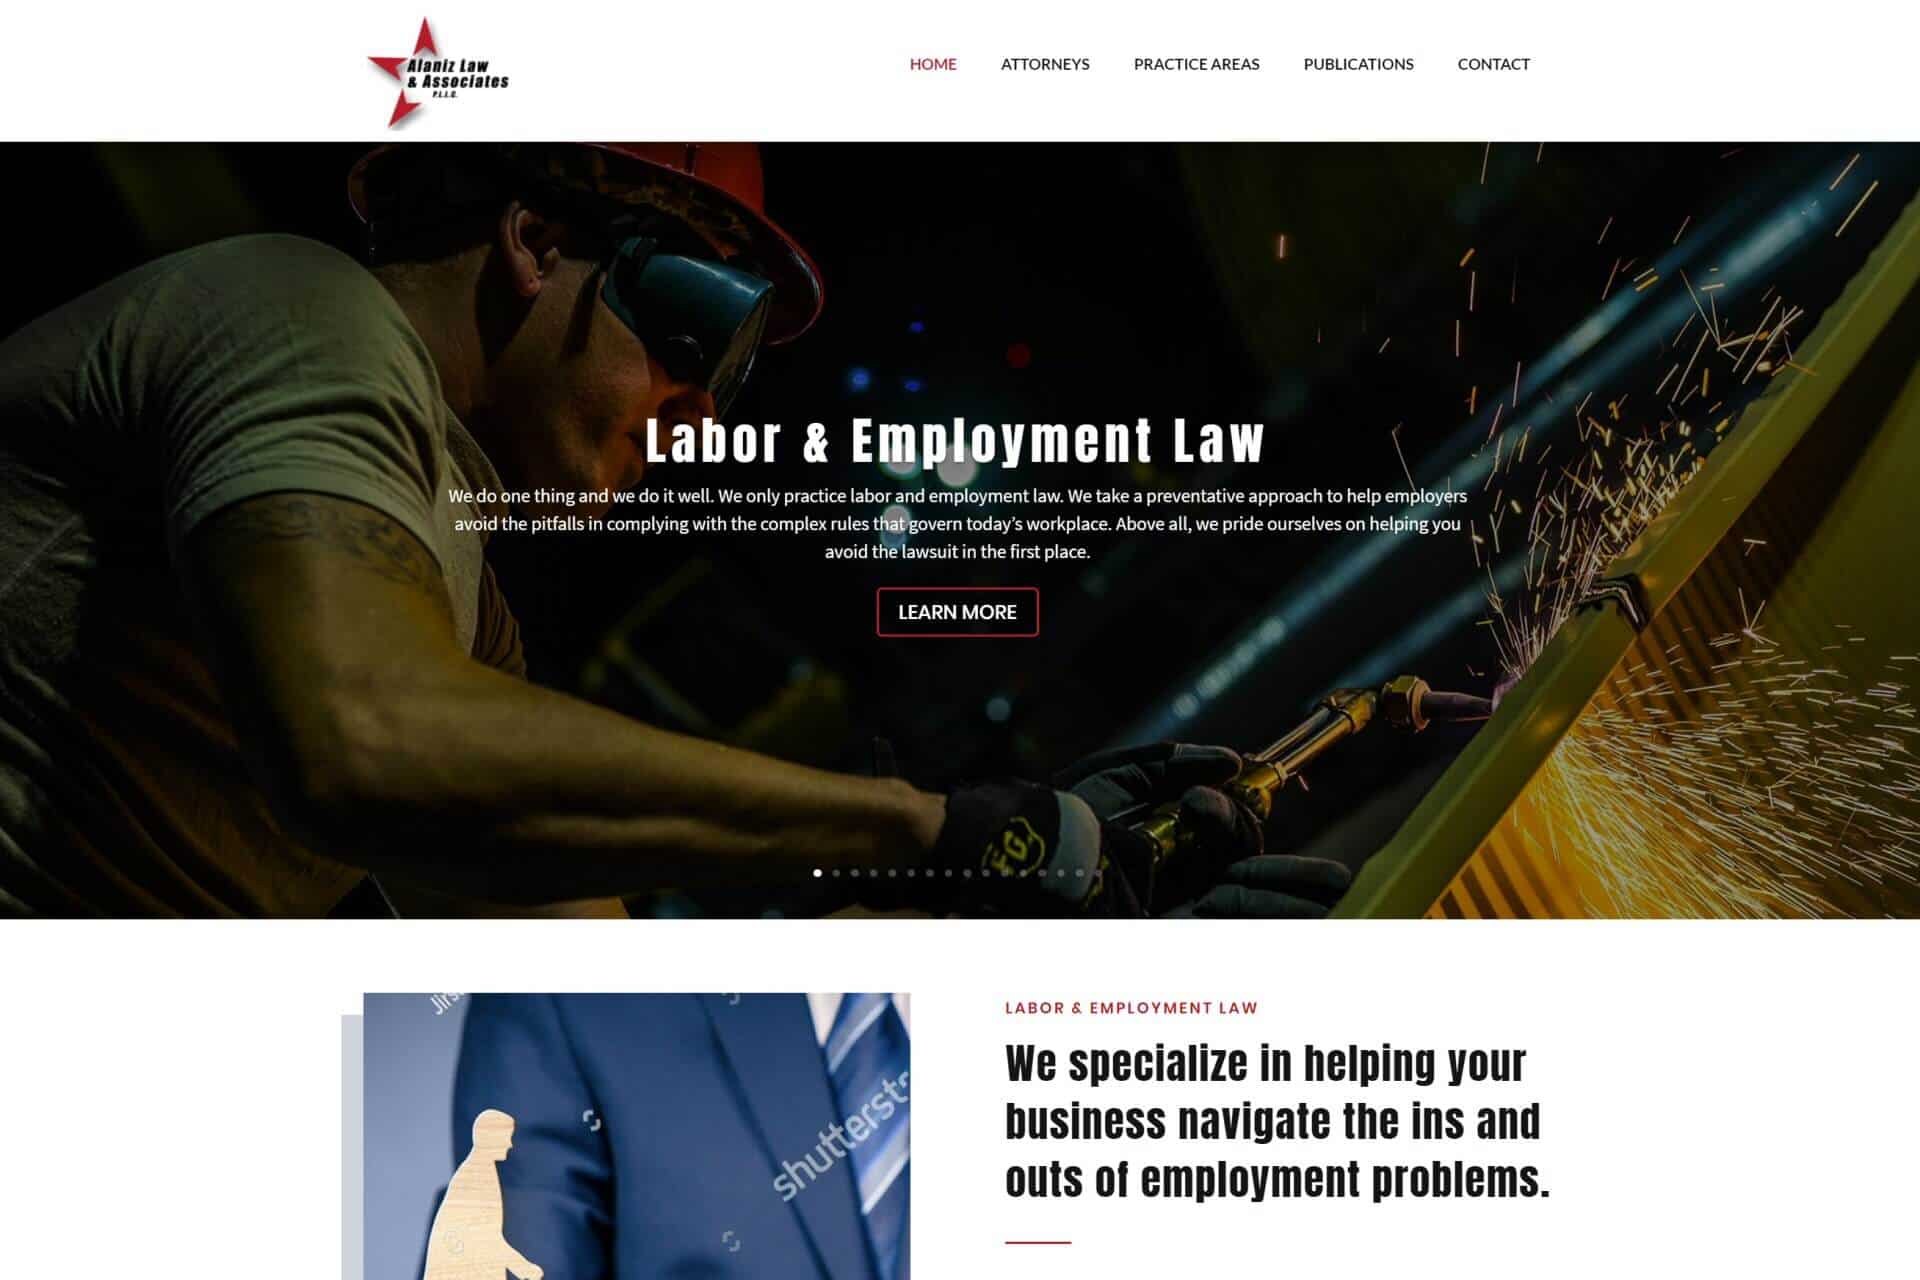 Alaniz Law and Associates by Texas Industrial Control Manufacturing